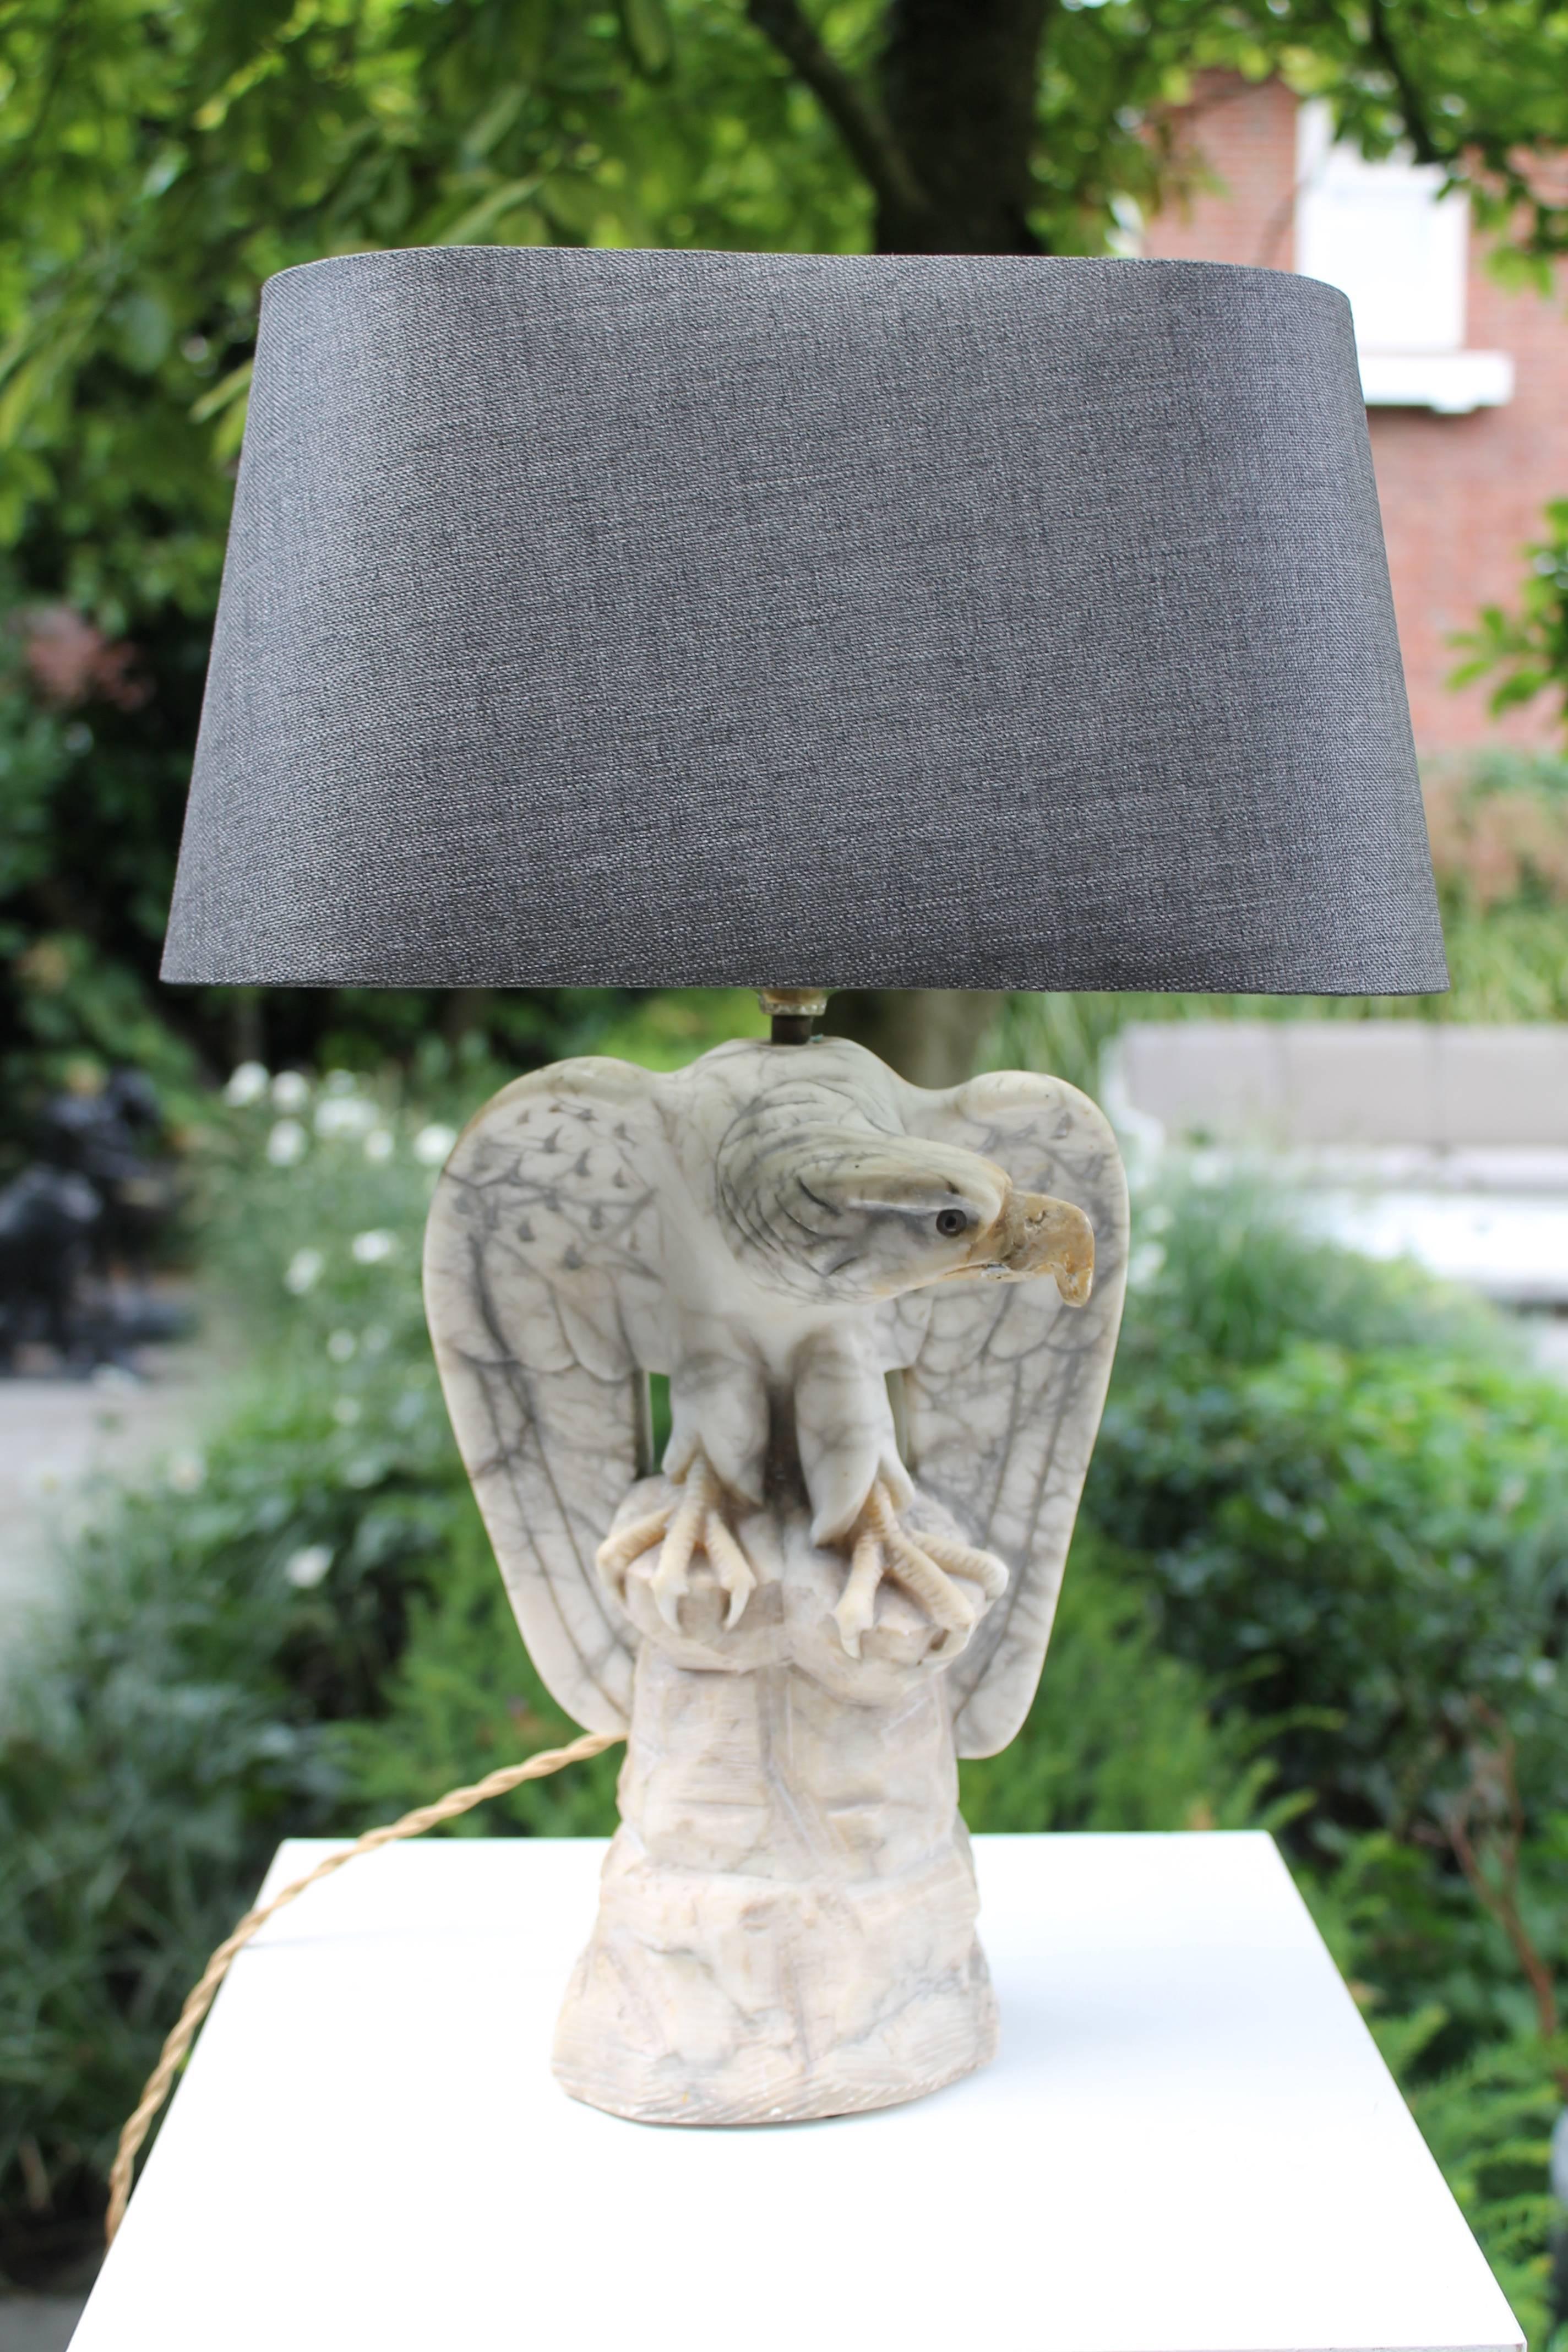 Pair of marble eagles as table lamps, with new fittings, wires and plugs.